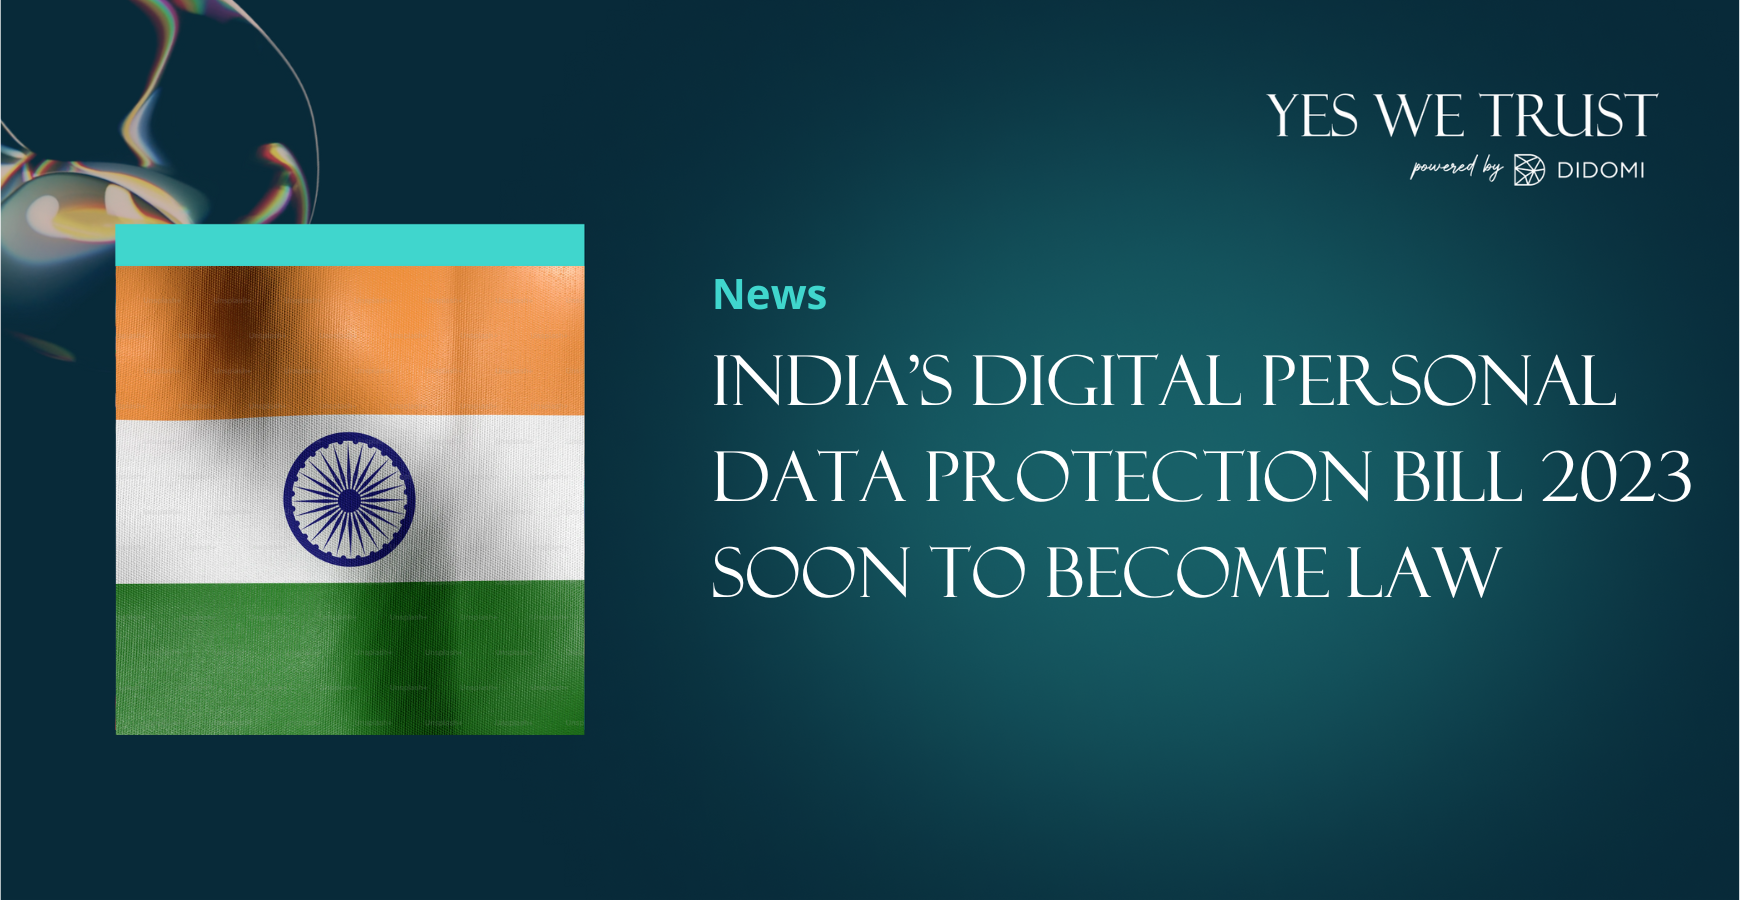 India’s Digital Personal Data Protection Bill 2023 soon to become law